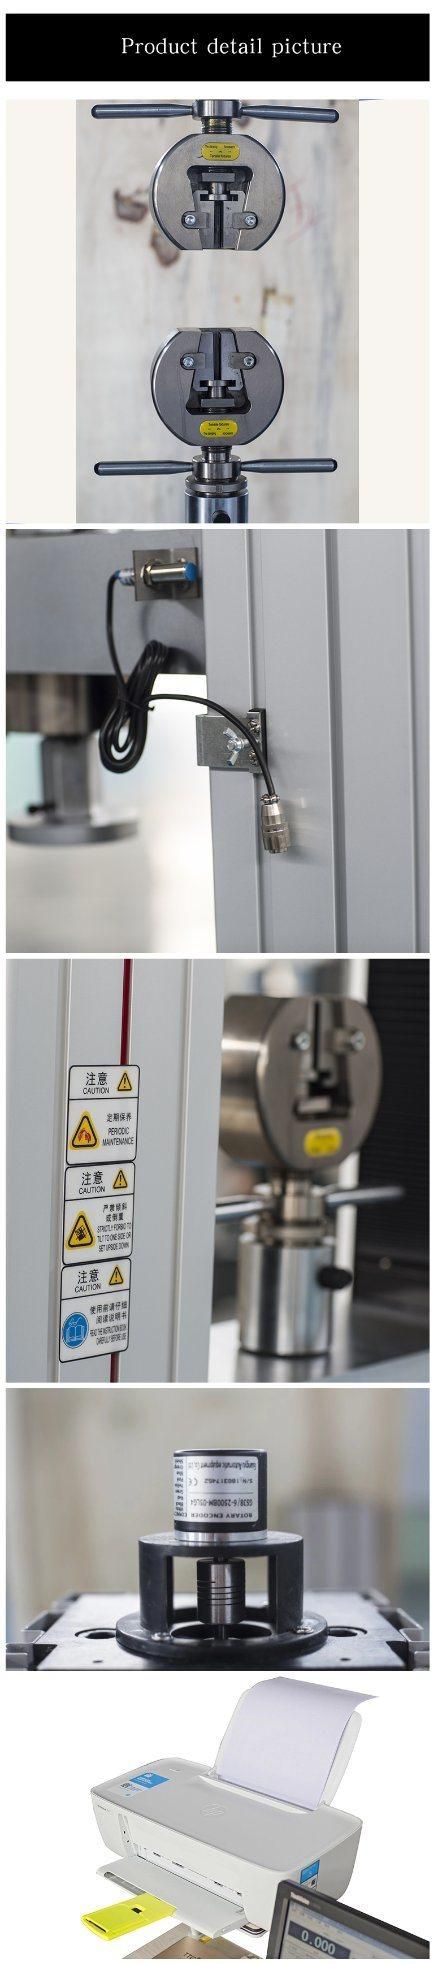 Wdw Series Manufacturers Selling Floor-Standing 300kn Electronic Tensile Testing Machine for Laboratory